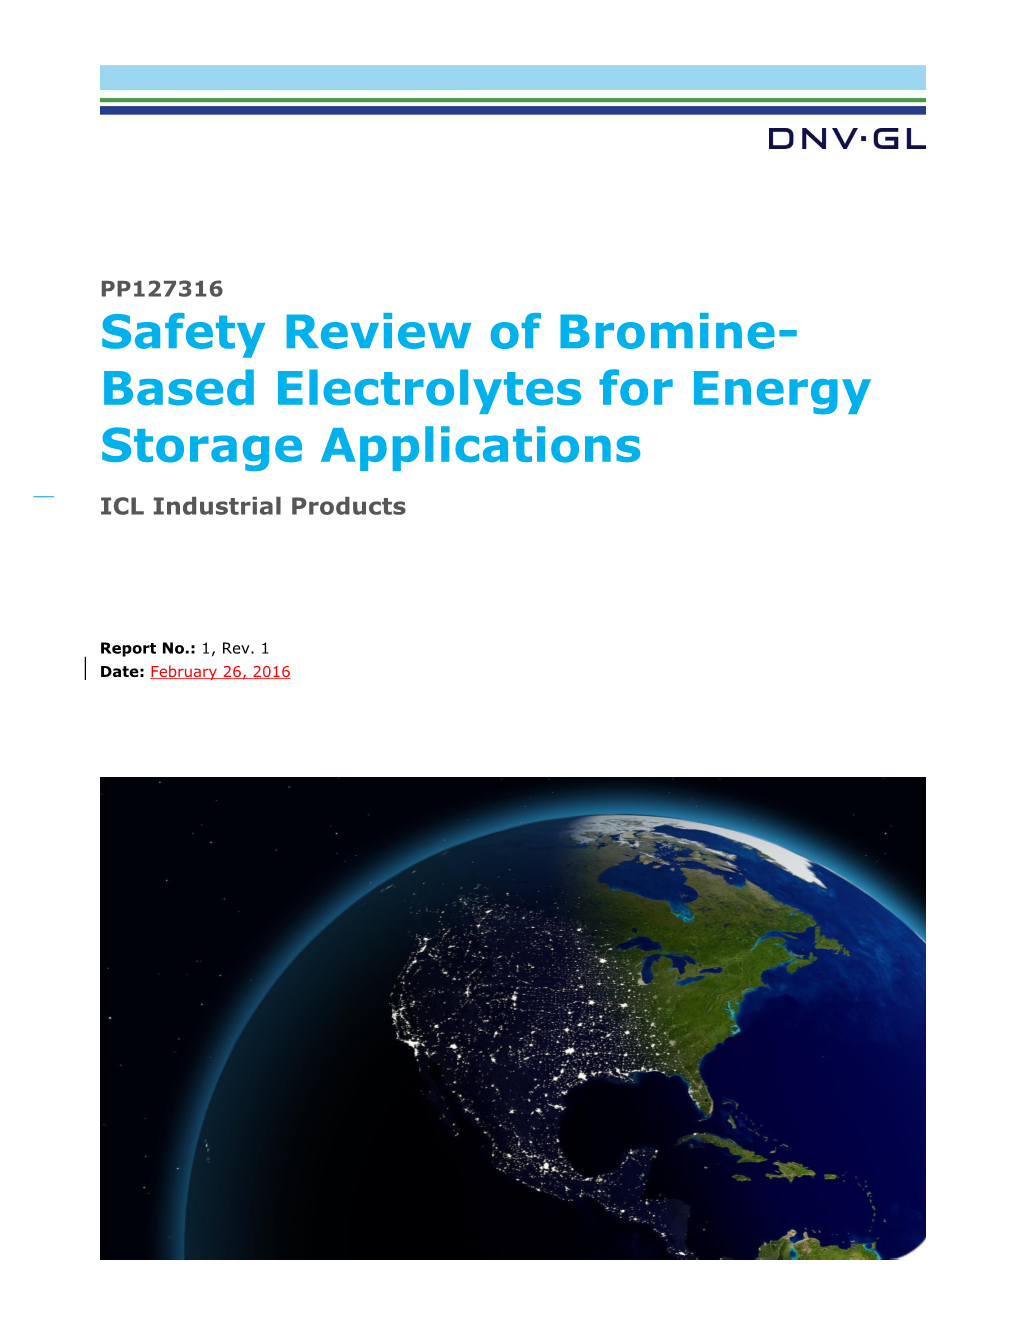 Safety Review of Bromine- Based Electrolytes for Energy Storage Applications